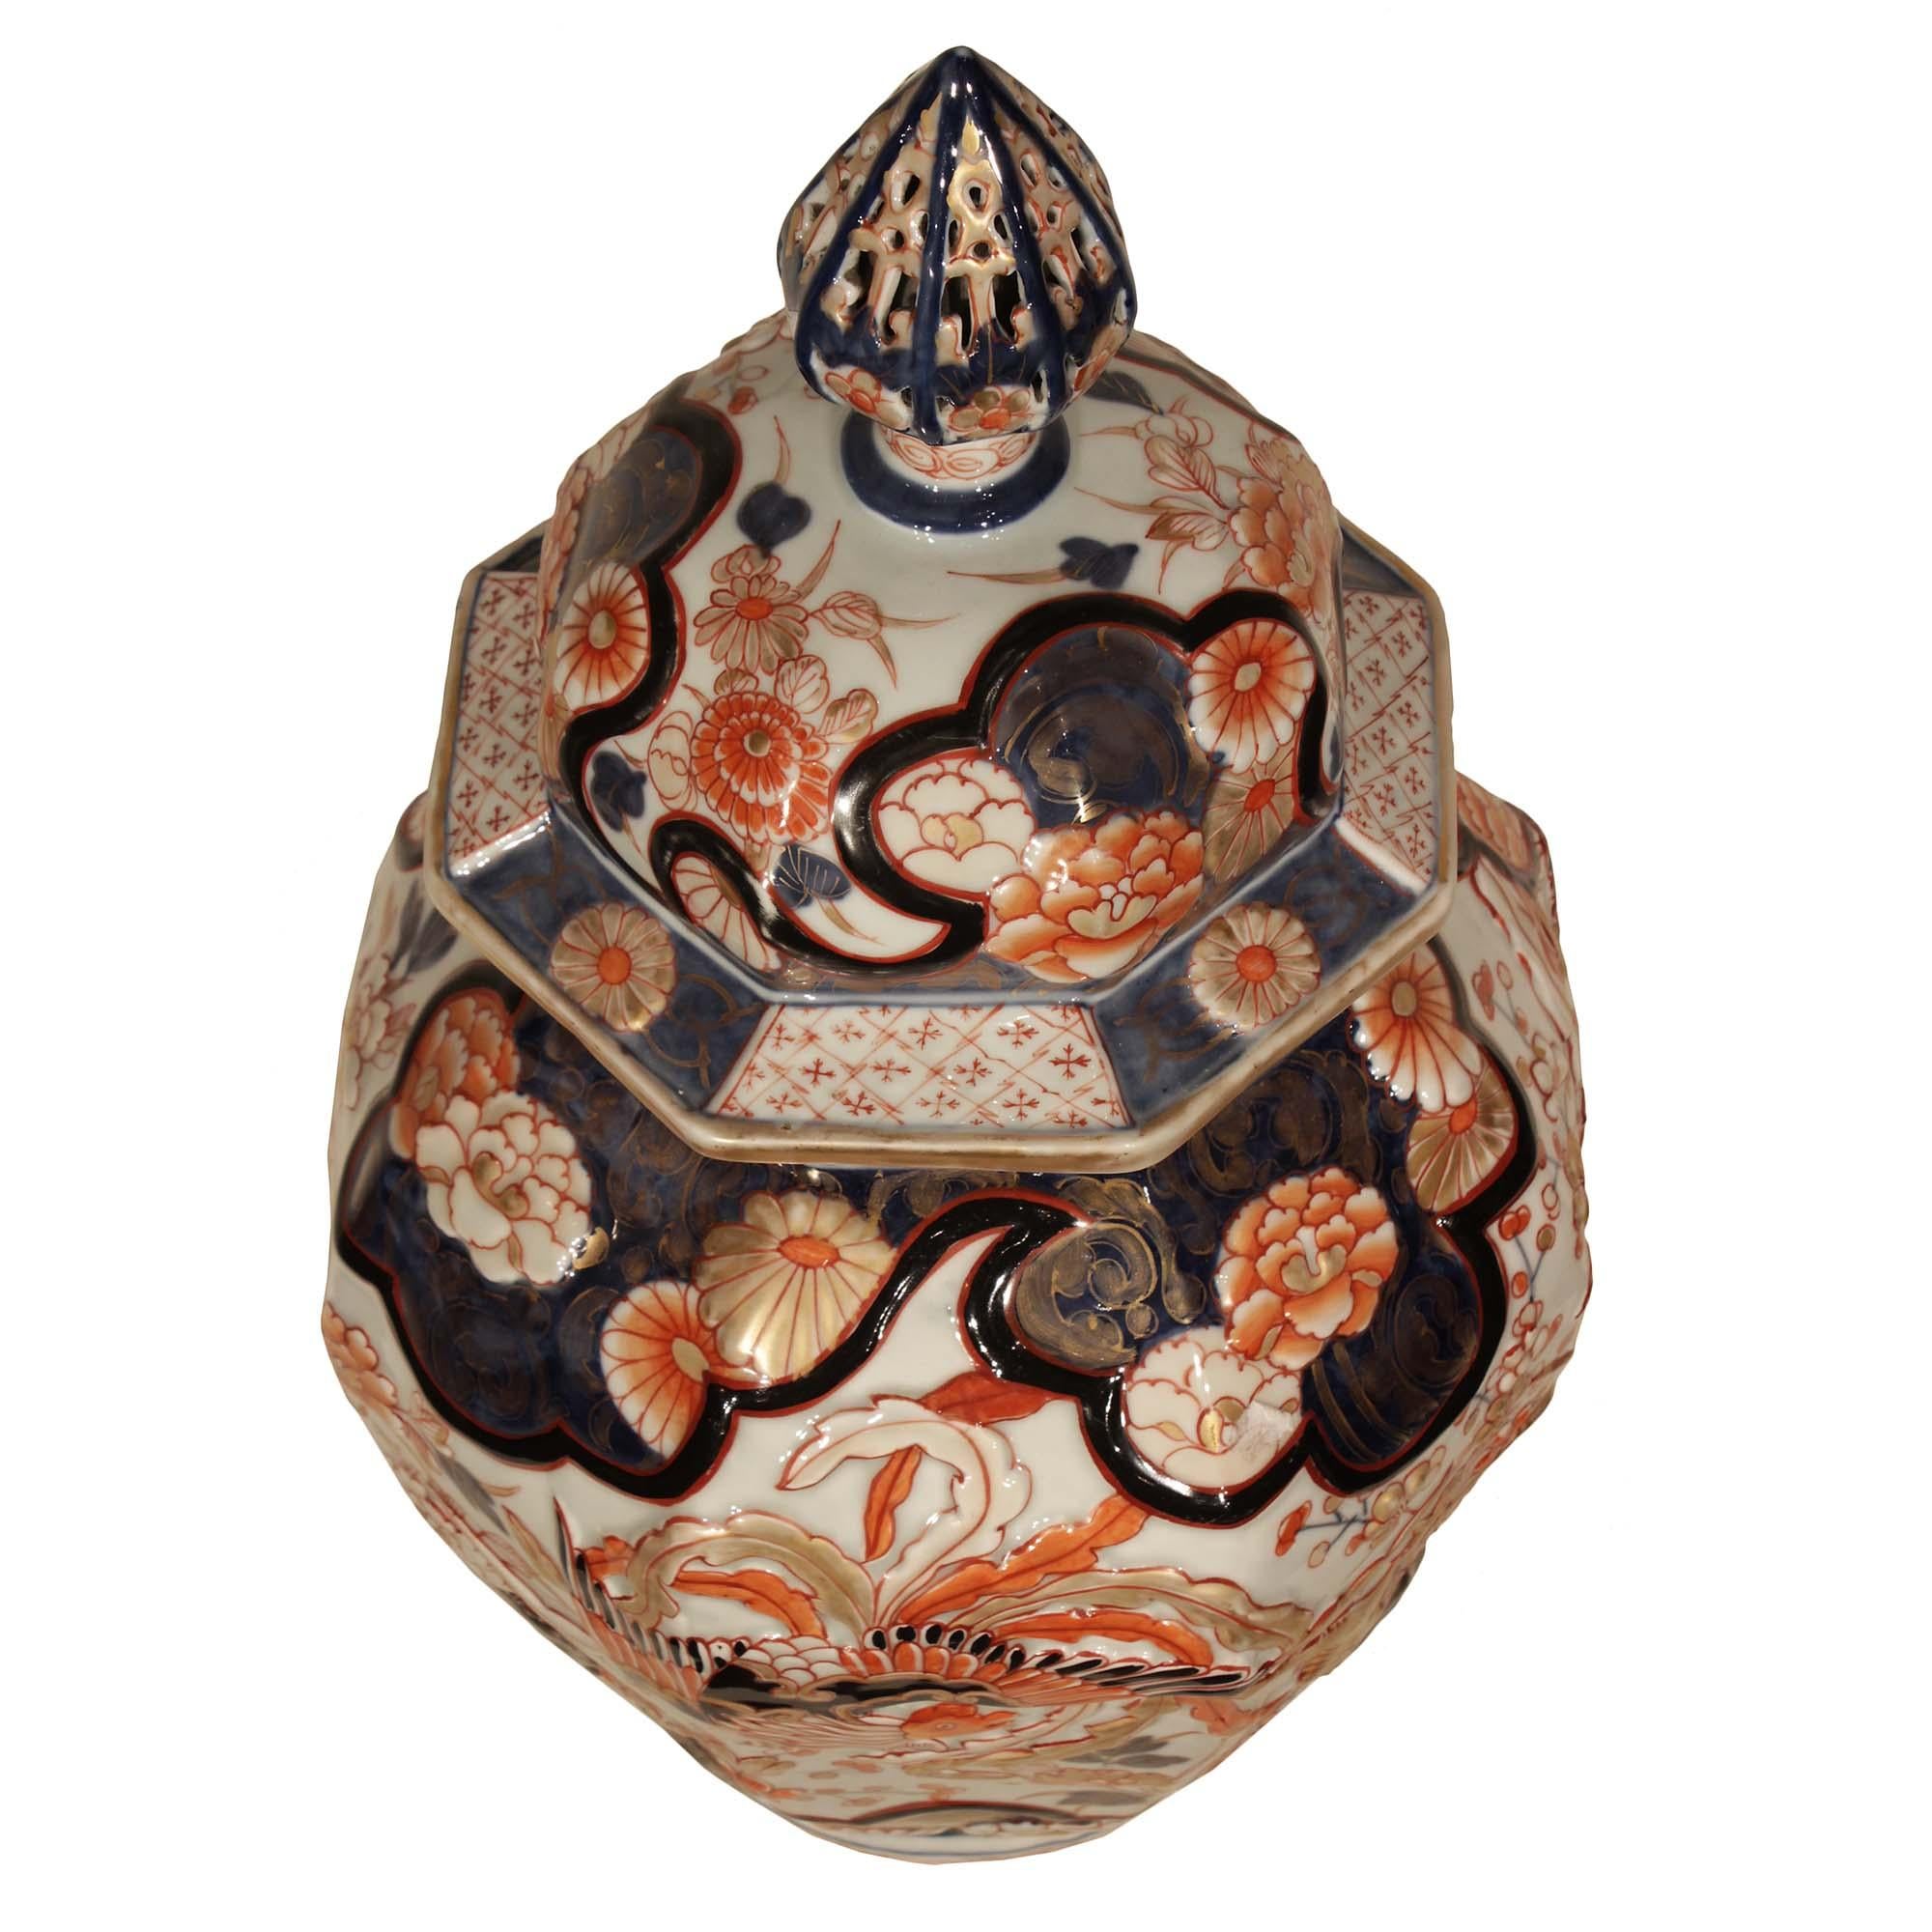 An impressive and true pair of 19th century Imari lidded urns. Each octagonal urn is decorated with protruding hand painted richly hued floral patterns with the mythical Phoenix at the center. The top lip is decorated with alternating clover